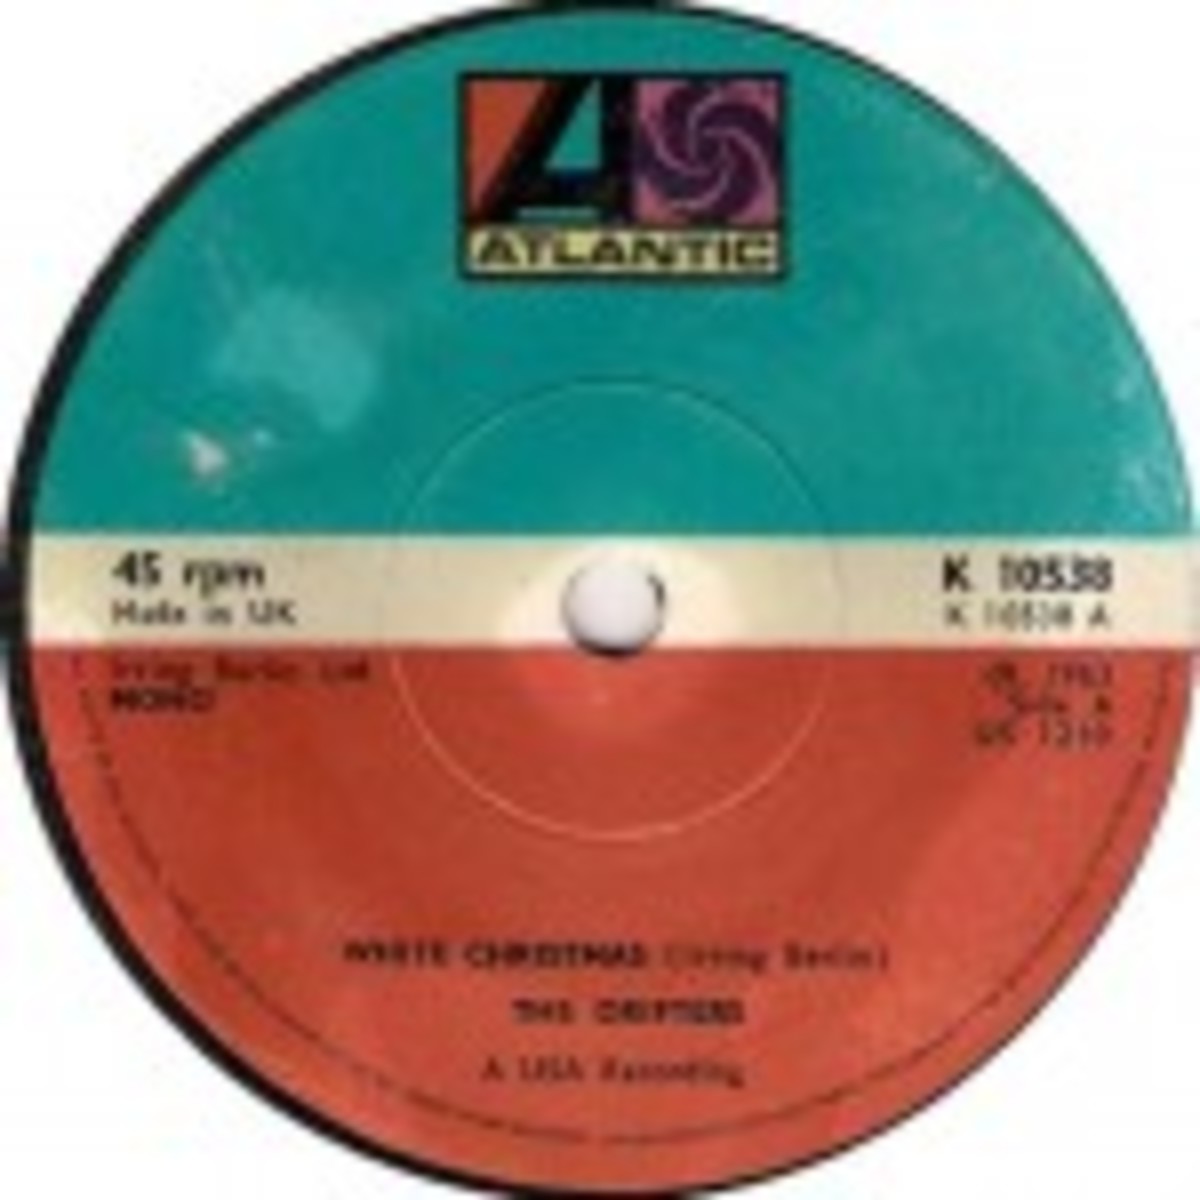 The Drifters White Christmas